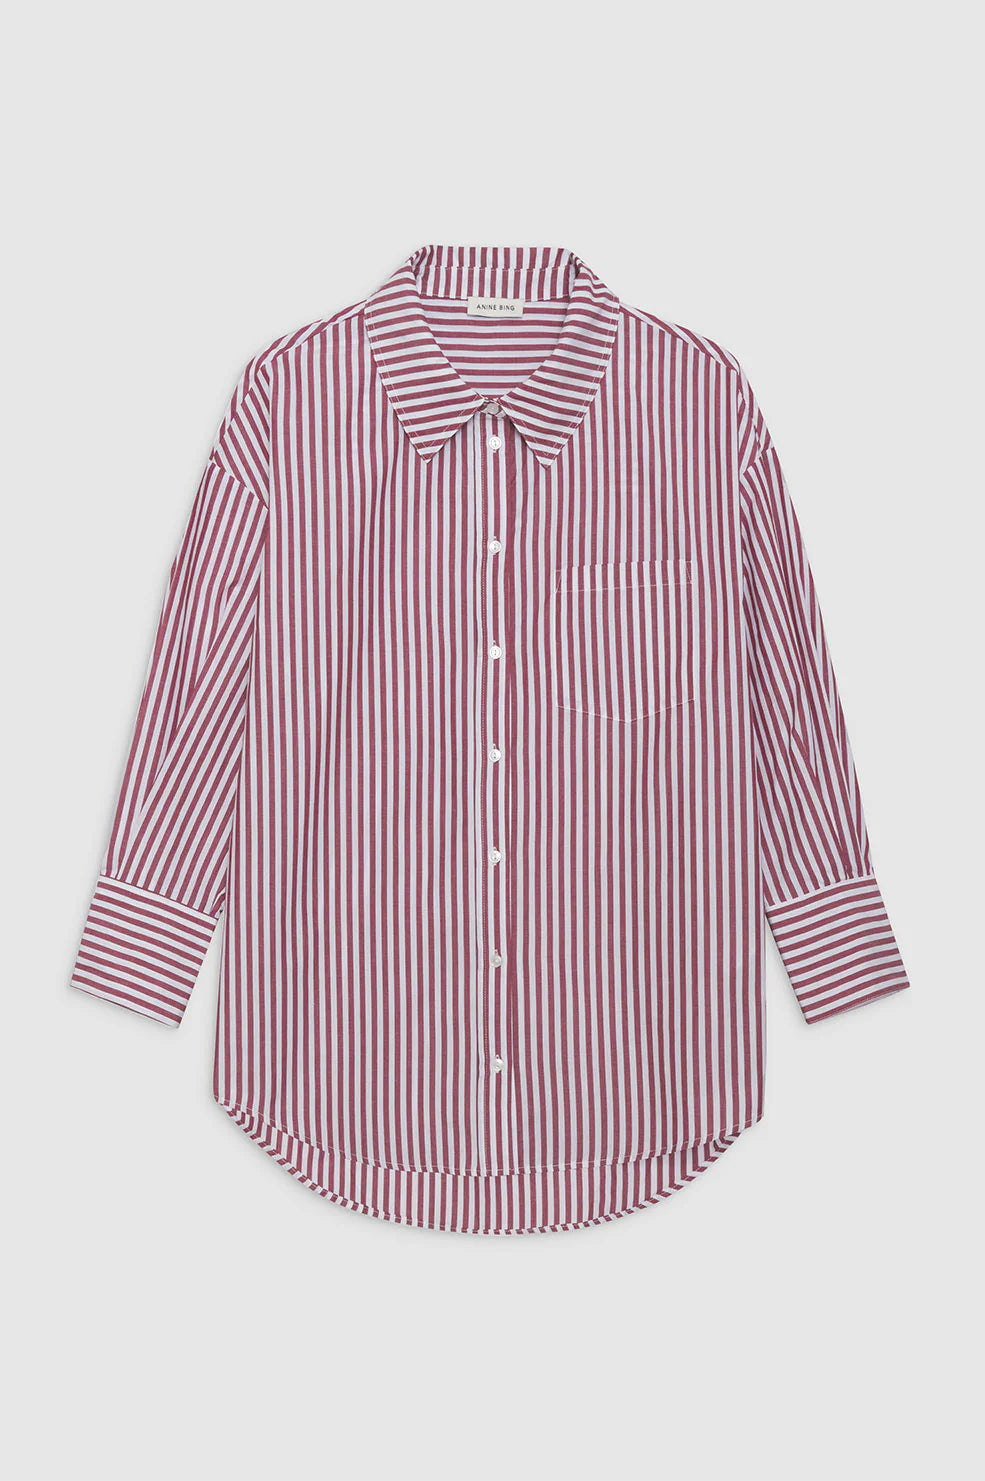 Mika Shirt in Red and White Stripe